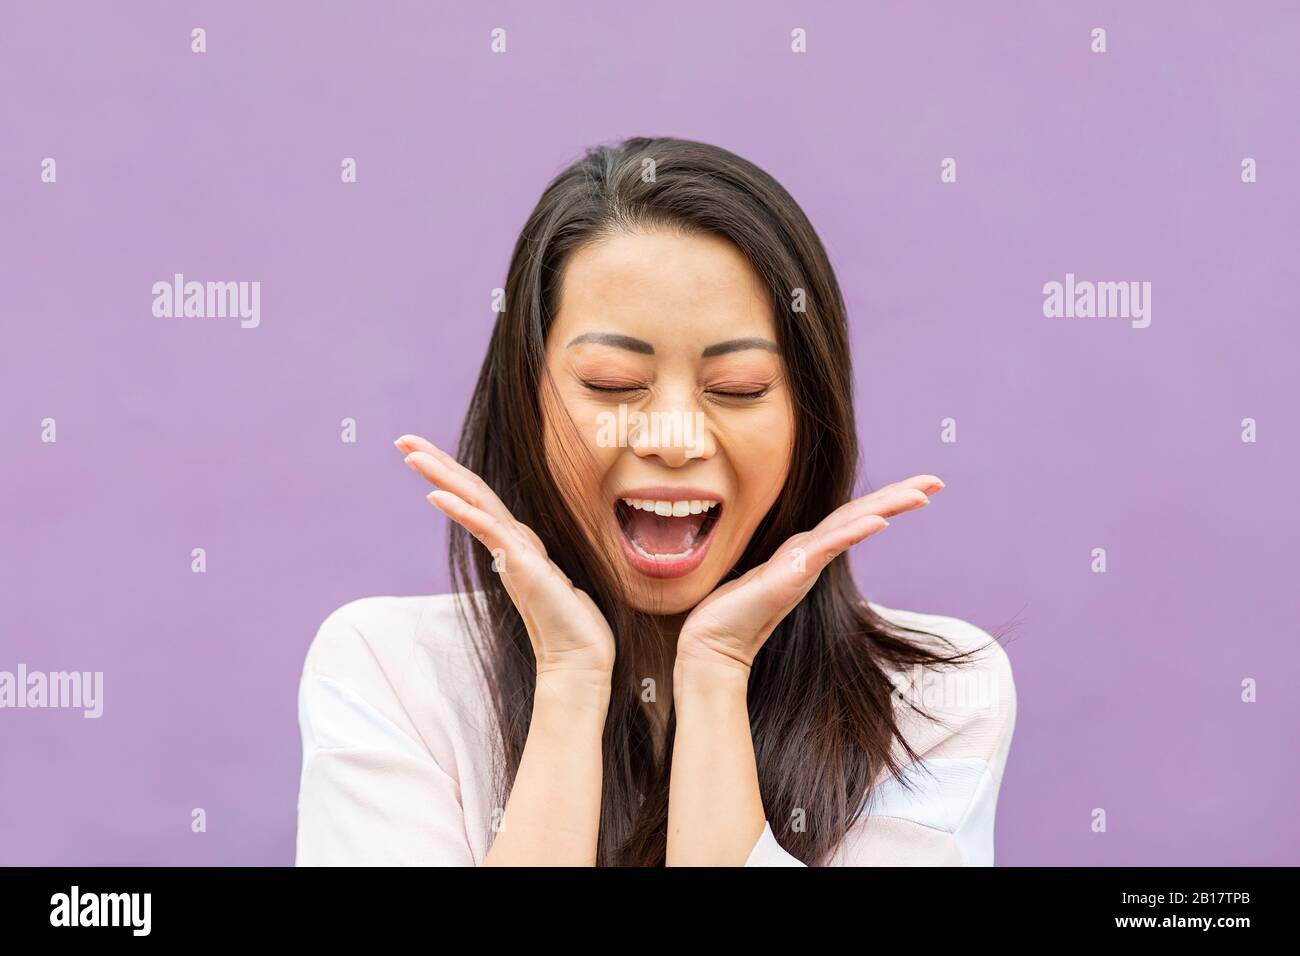 Portrait of happy woman with eyes closed crying of joy against purple background Stock Photo